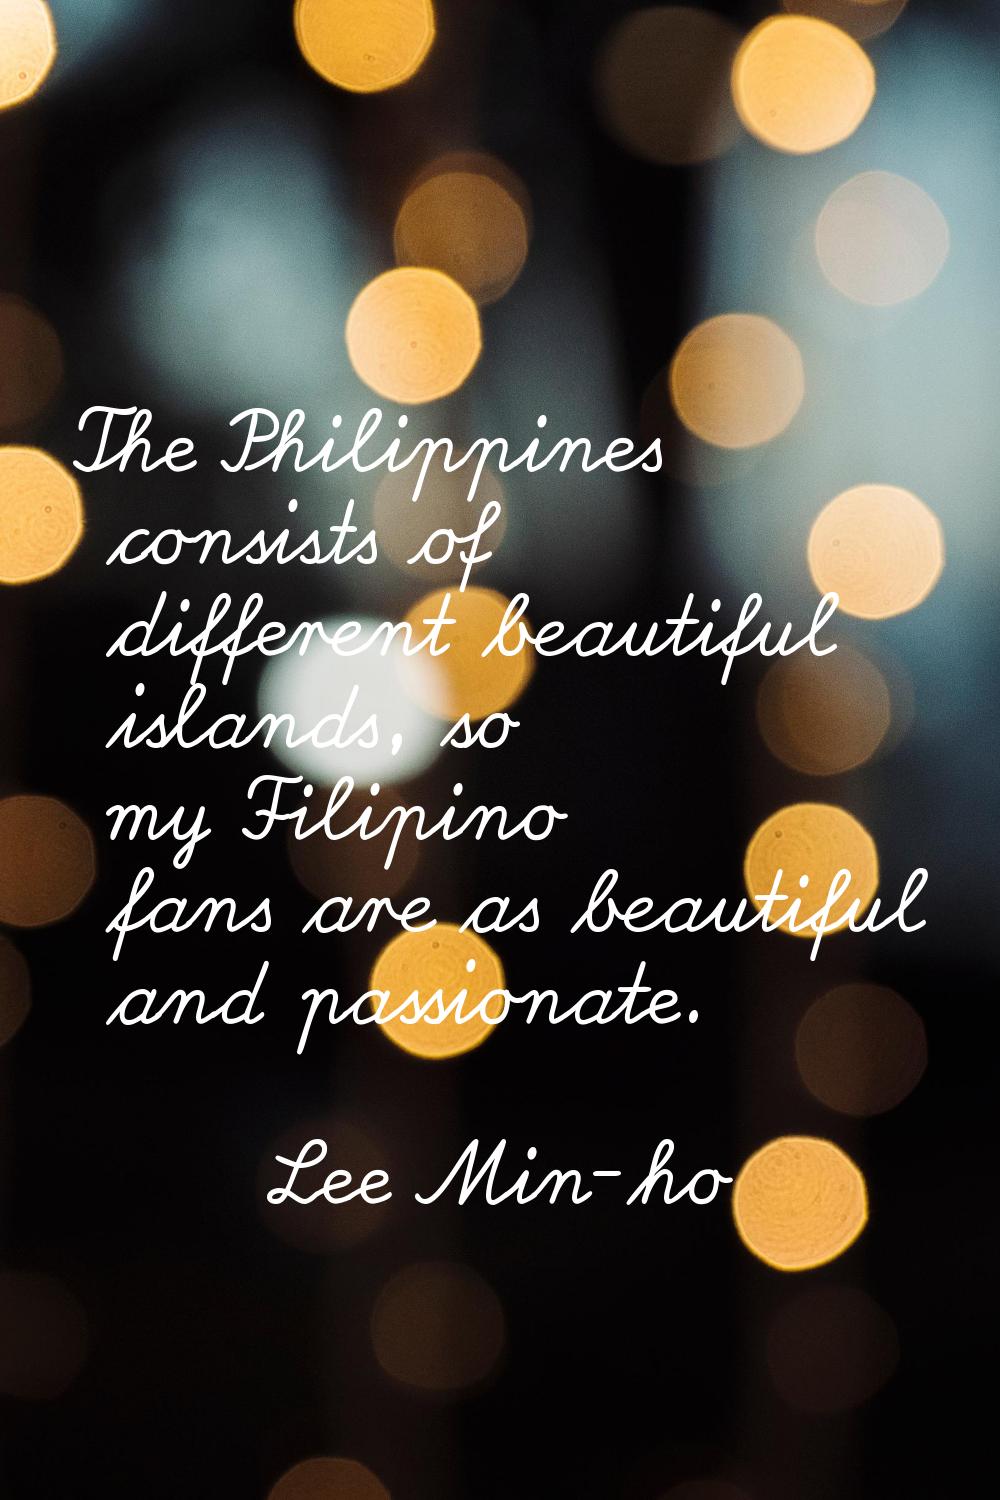 The Philippines consists of different beautiful islands, so my Filipino fans are as beautiful and p